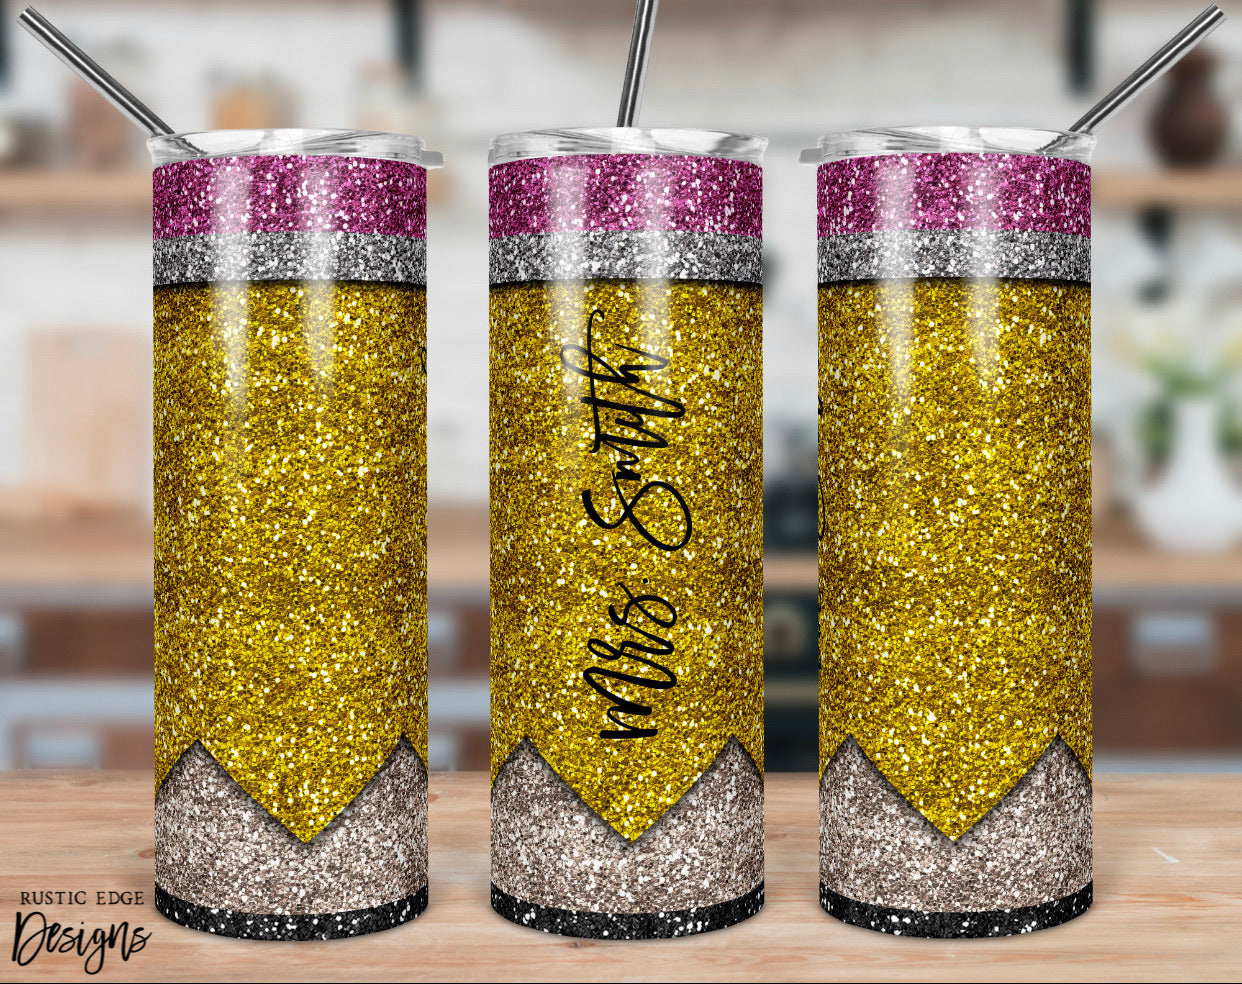 WHITE SUBLIMATION TUMBLERS [stainless inside]